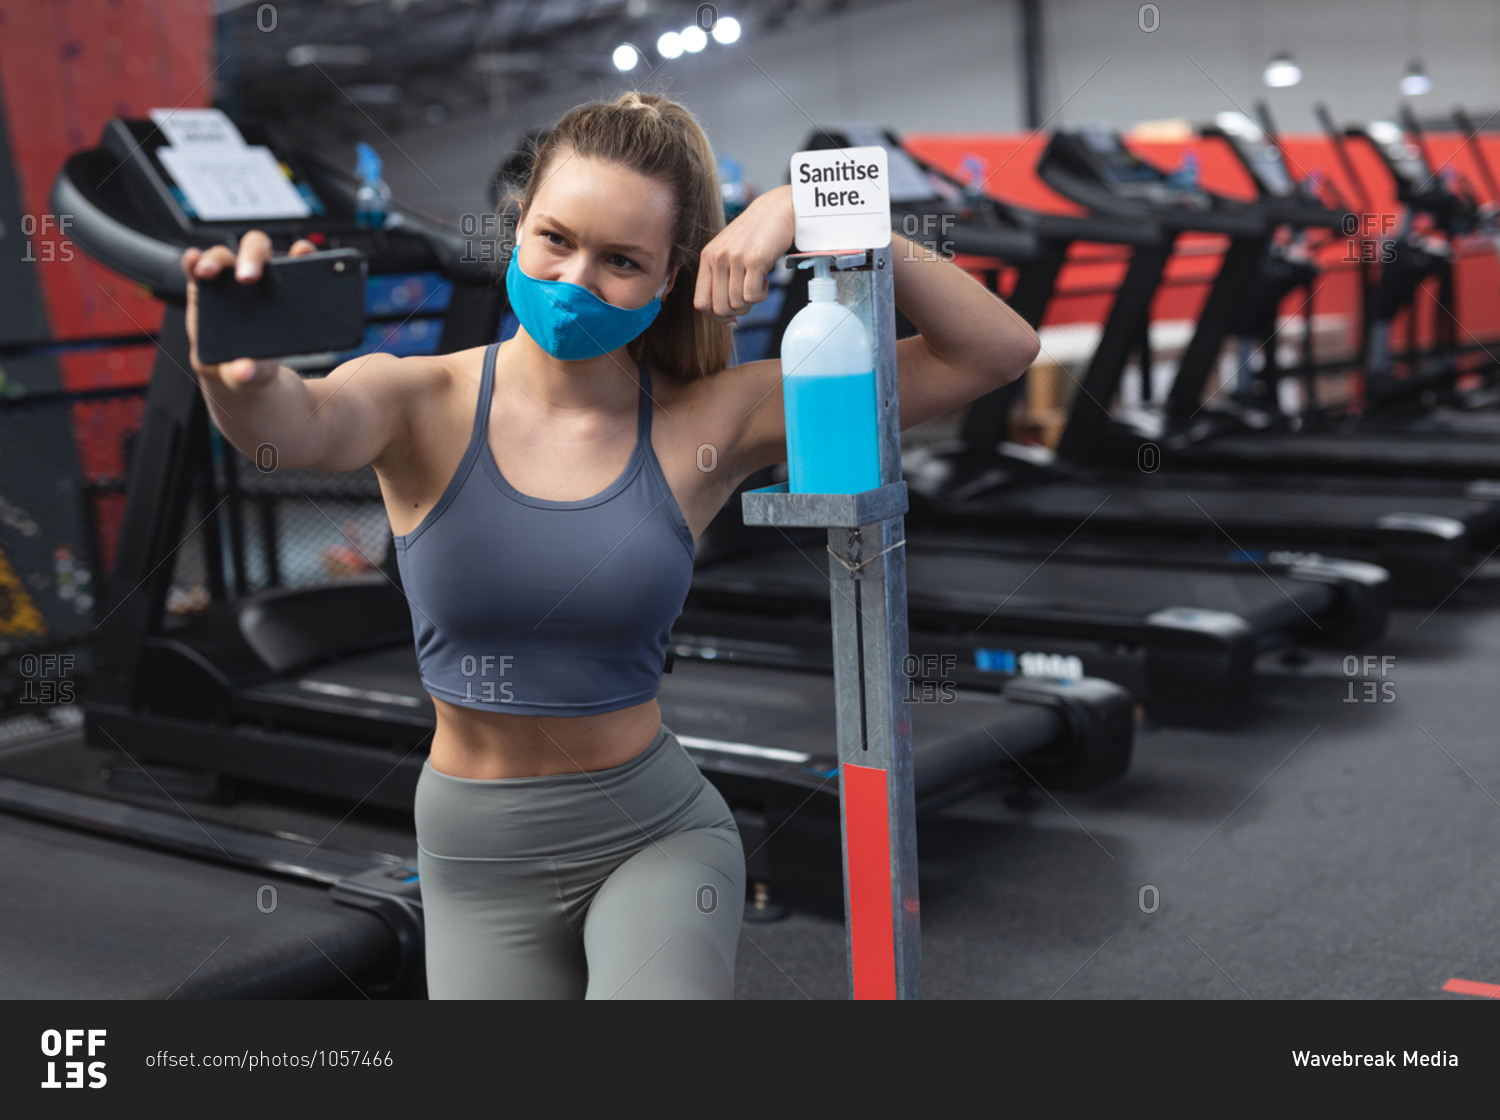 Fit caucasian woman wearing face mask taking a selfie with sanitizer foot dispenser stand with sanitize here text in the gym.